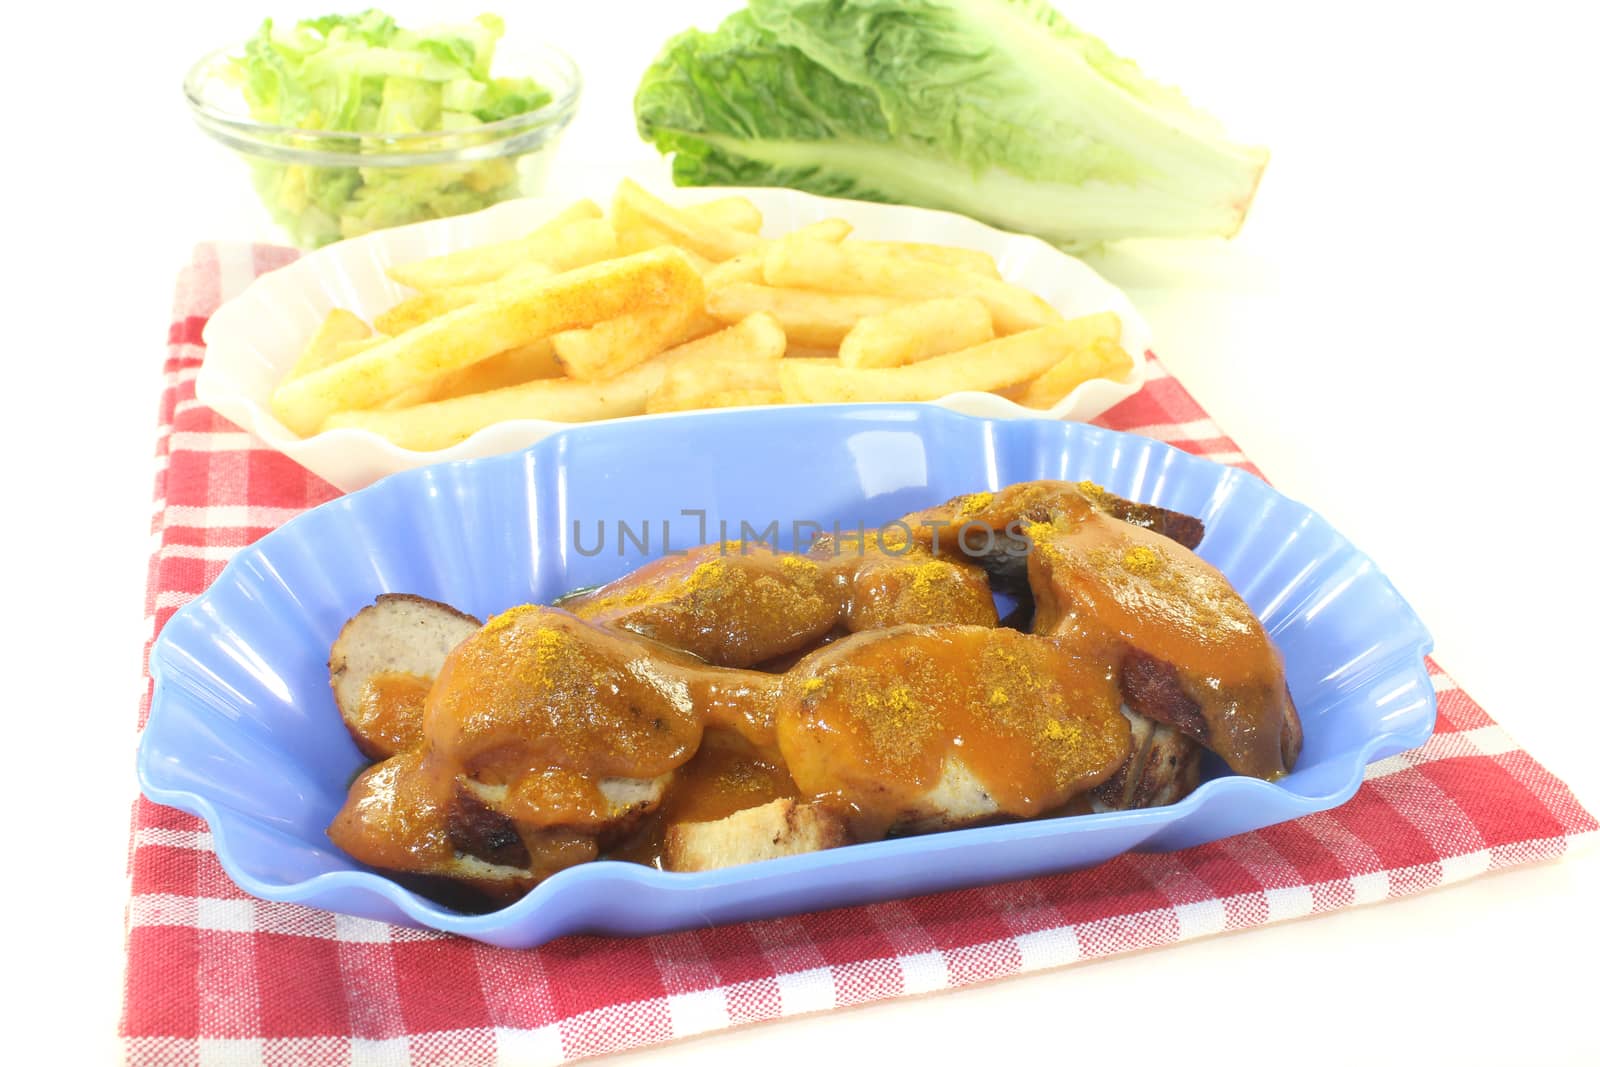 Currywurst with french fries on a napkin before light background